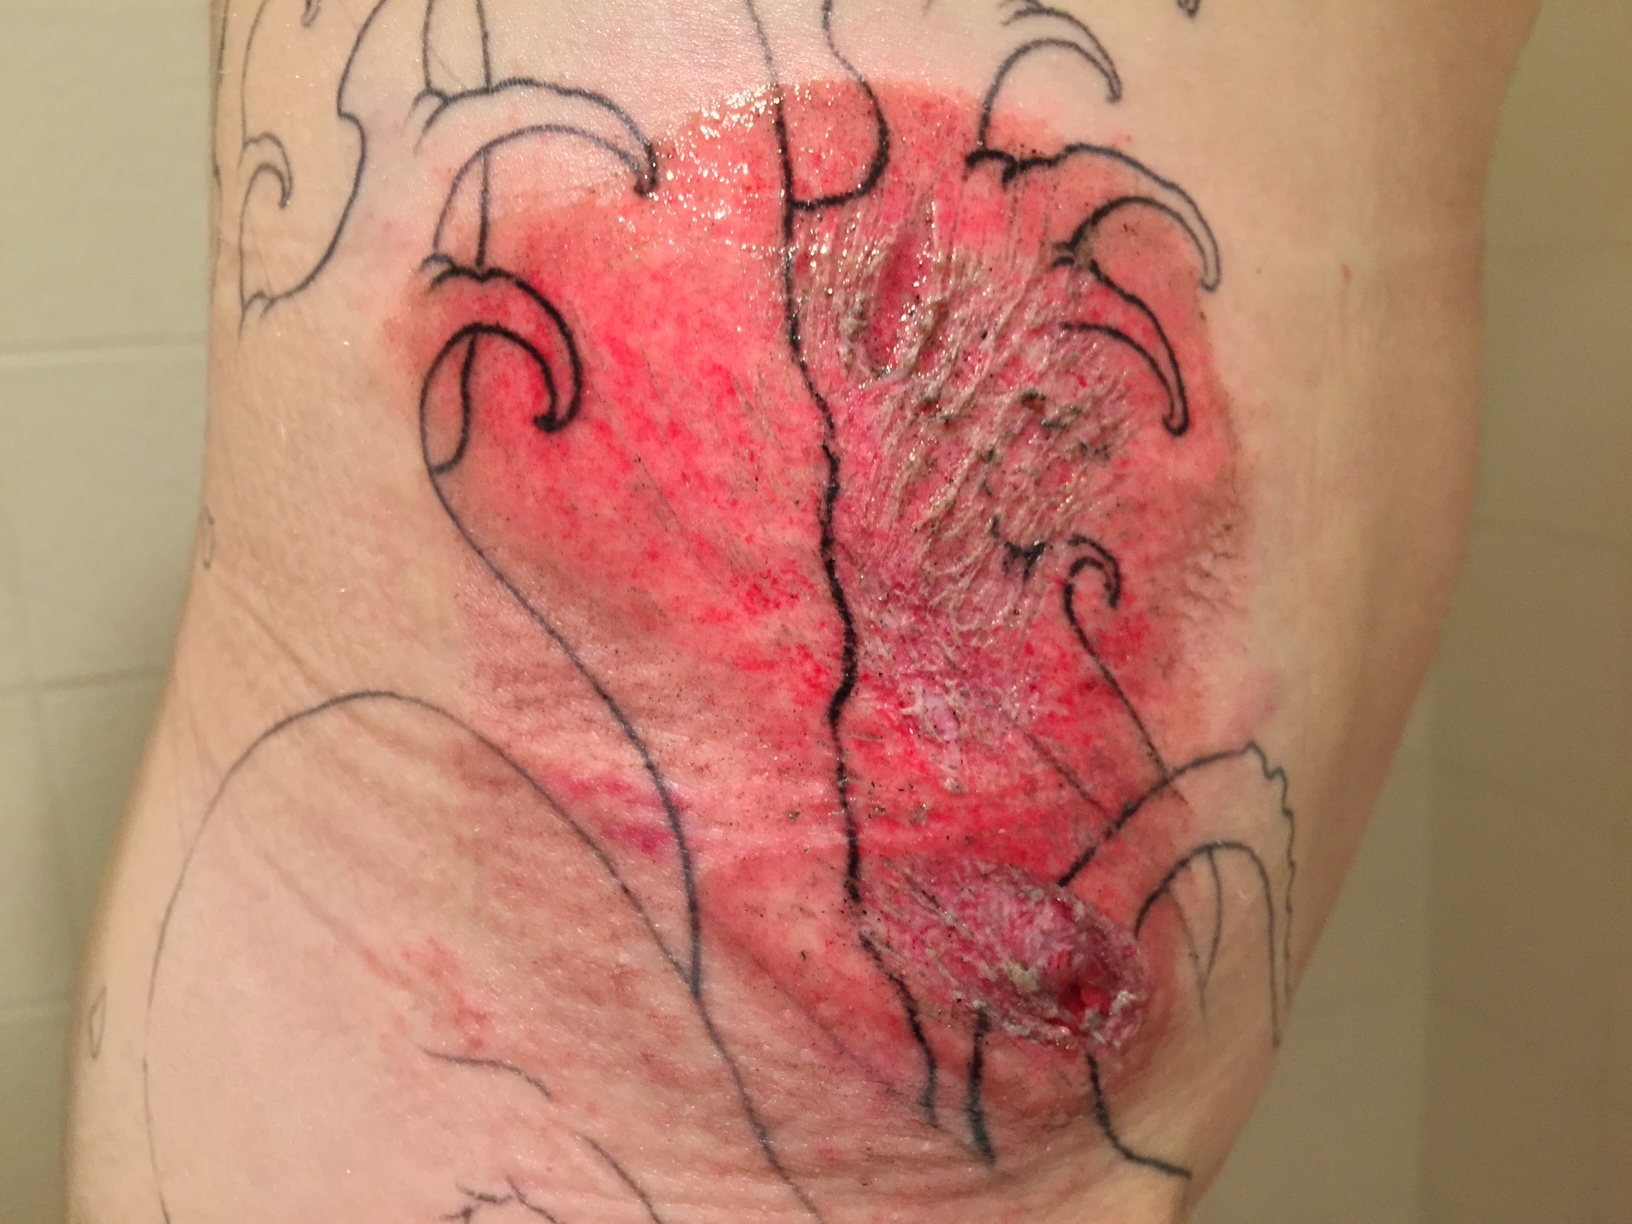 Road rash after first big cleaning, night of crash